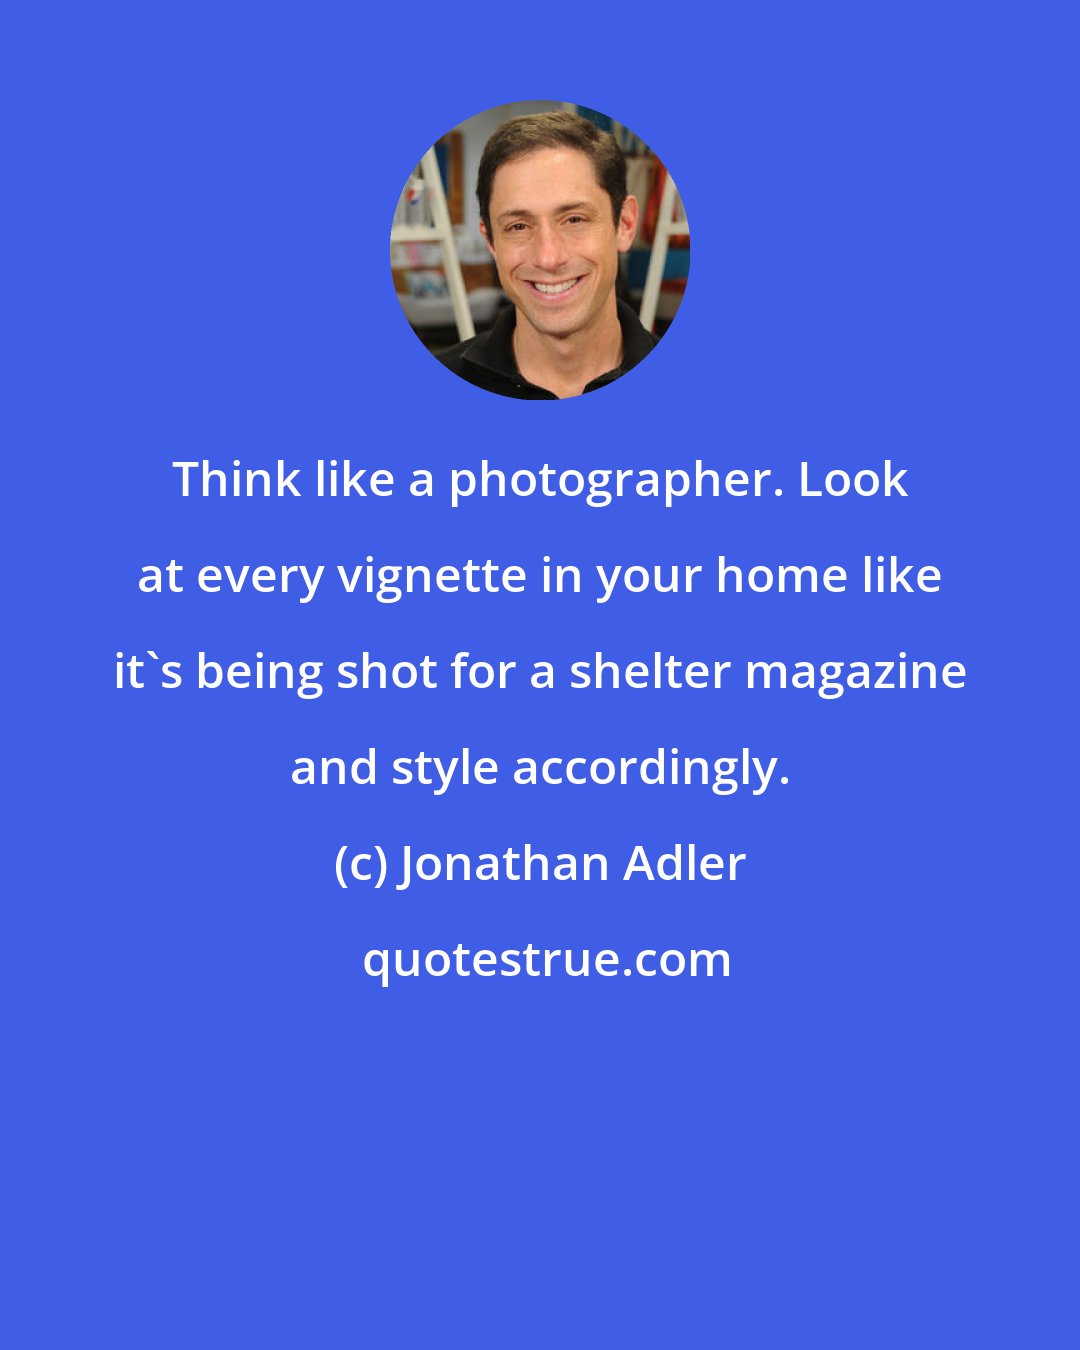 Jonathan Adler: Think like a photographer. Look at every vignette in your home like it's being shot for a shelter magazine and style accordingly.